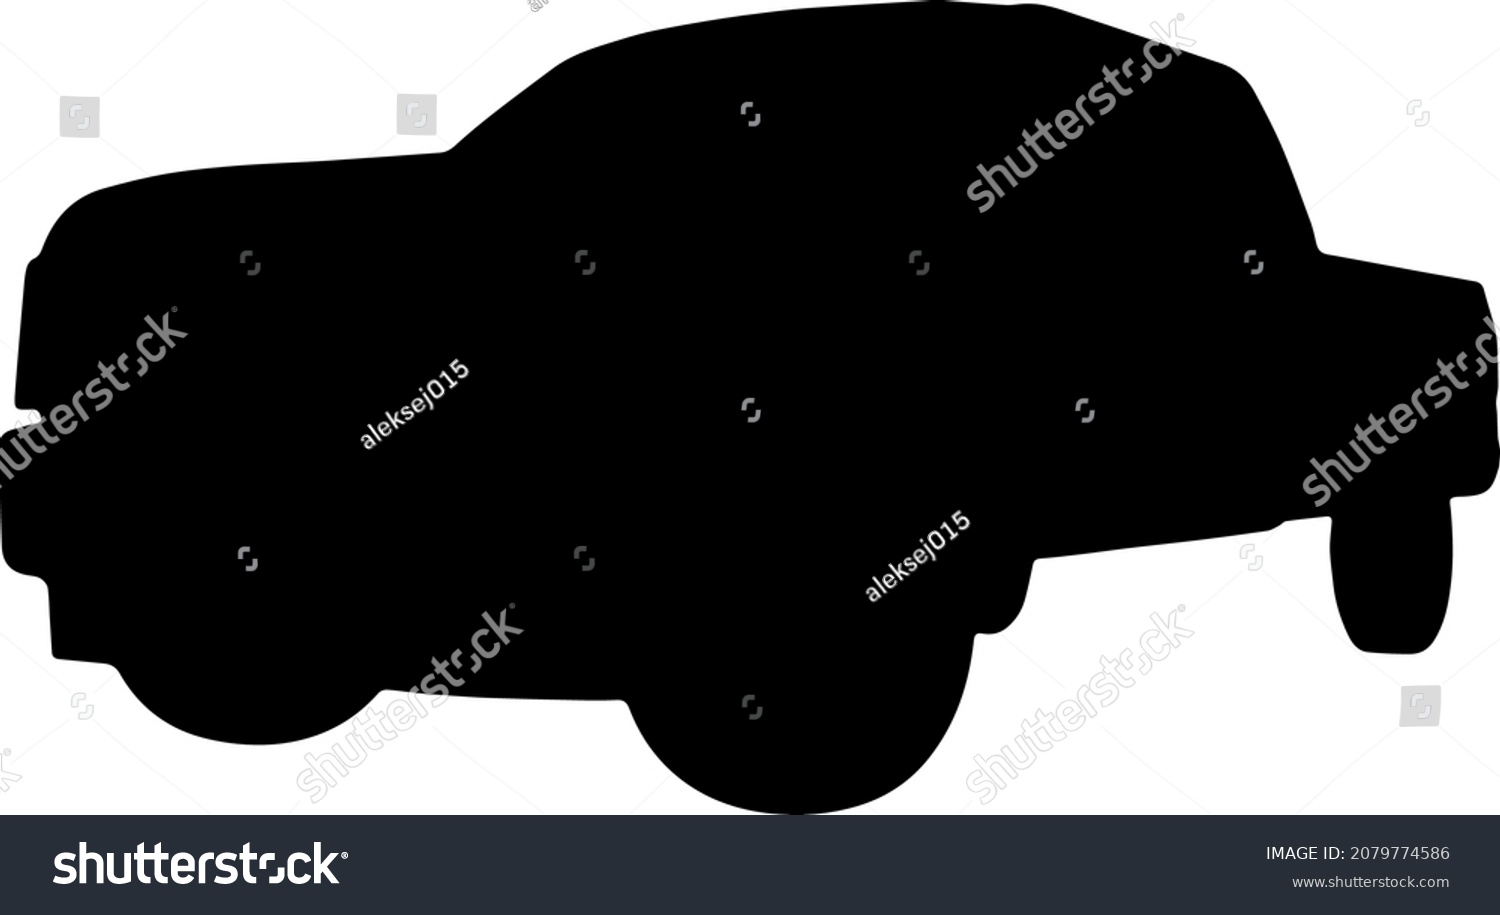 SVG of Pickup Truck Silhouettes SVG Truck Silhouette svg